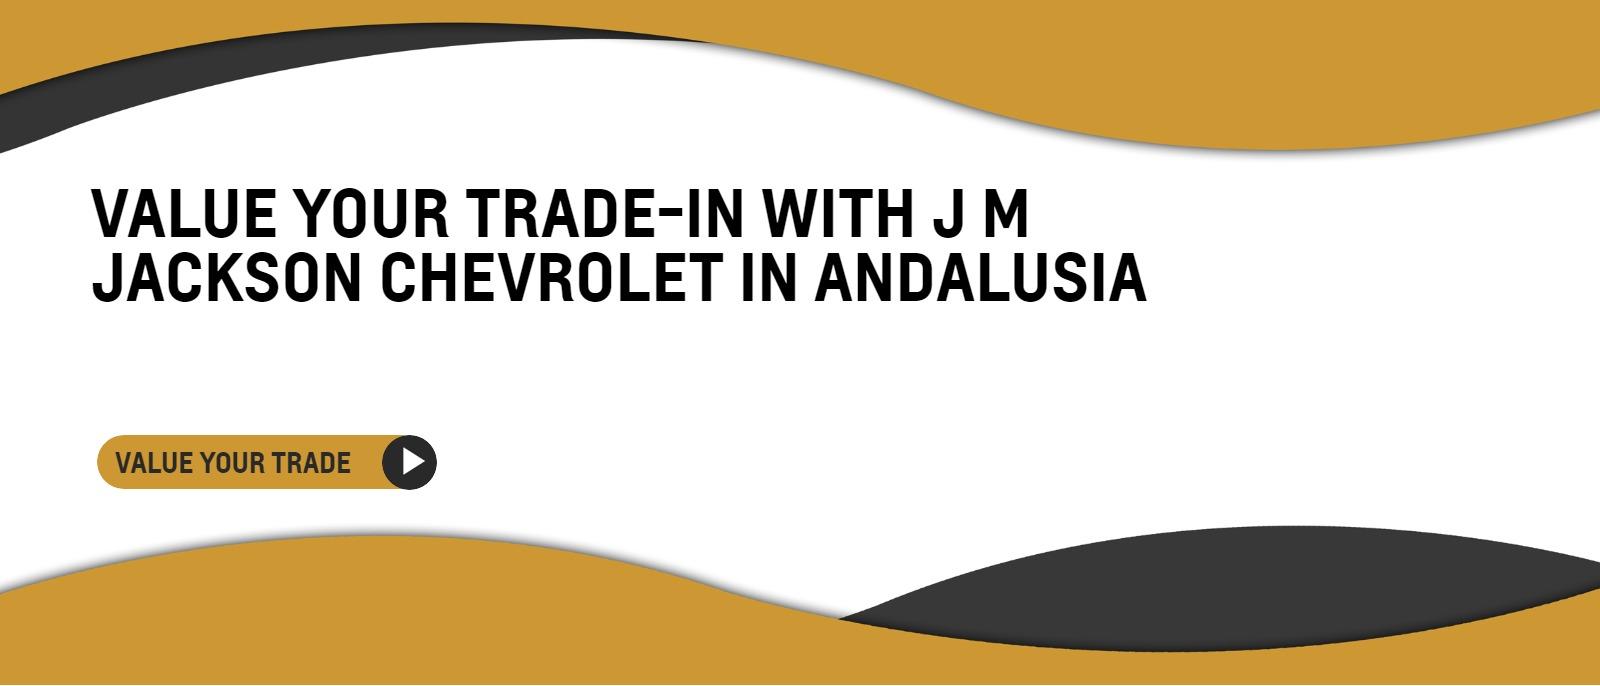 VALUE YOUR TRADE-IN WITH J M JACKSON CHEVROLET IN ANDALUSIA